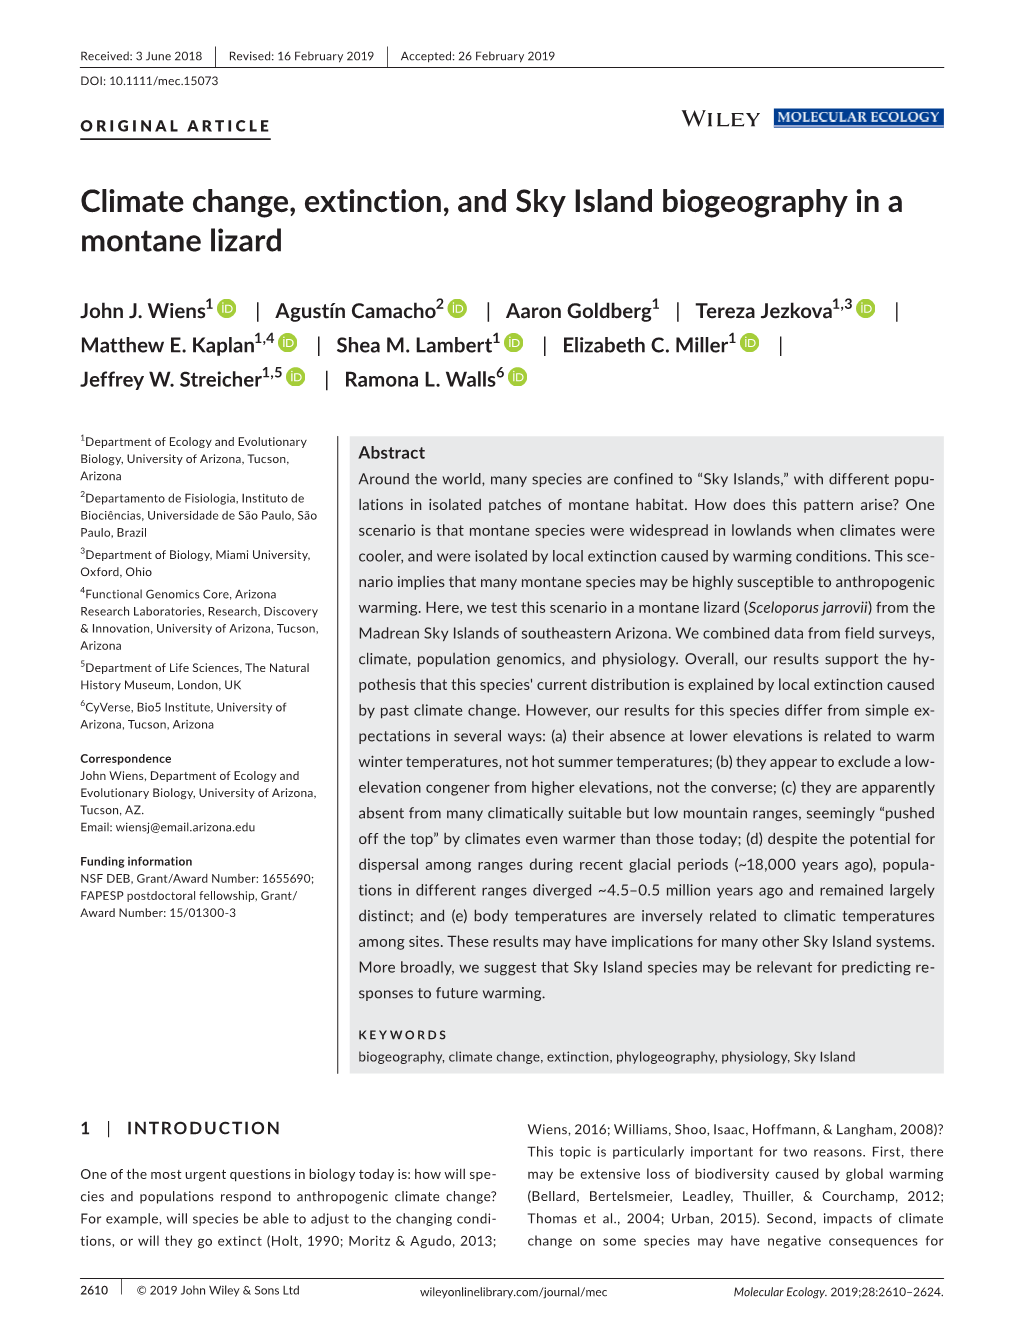 Climate Change, Extinction, and Sky Island Biogeography in a Montane Lizard